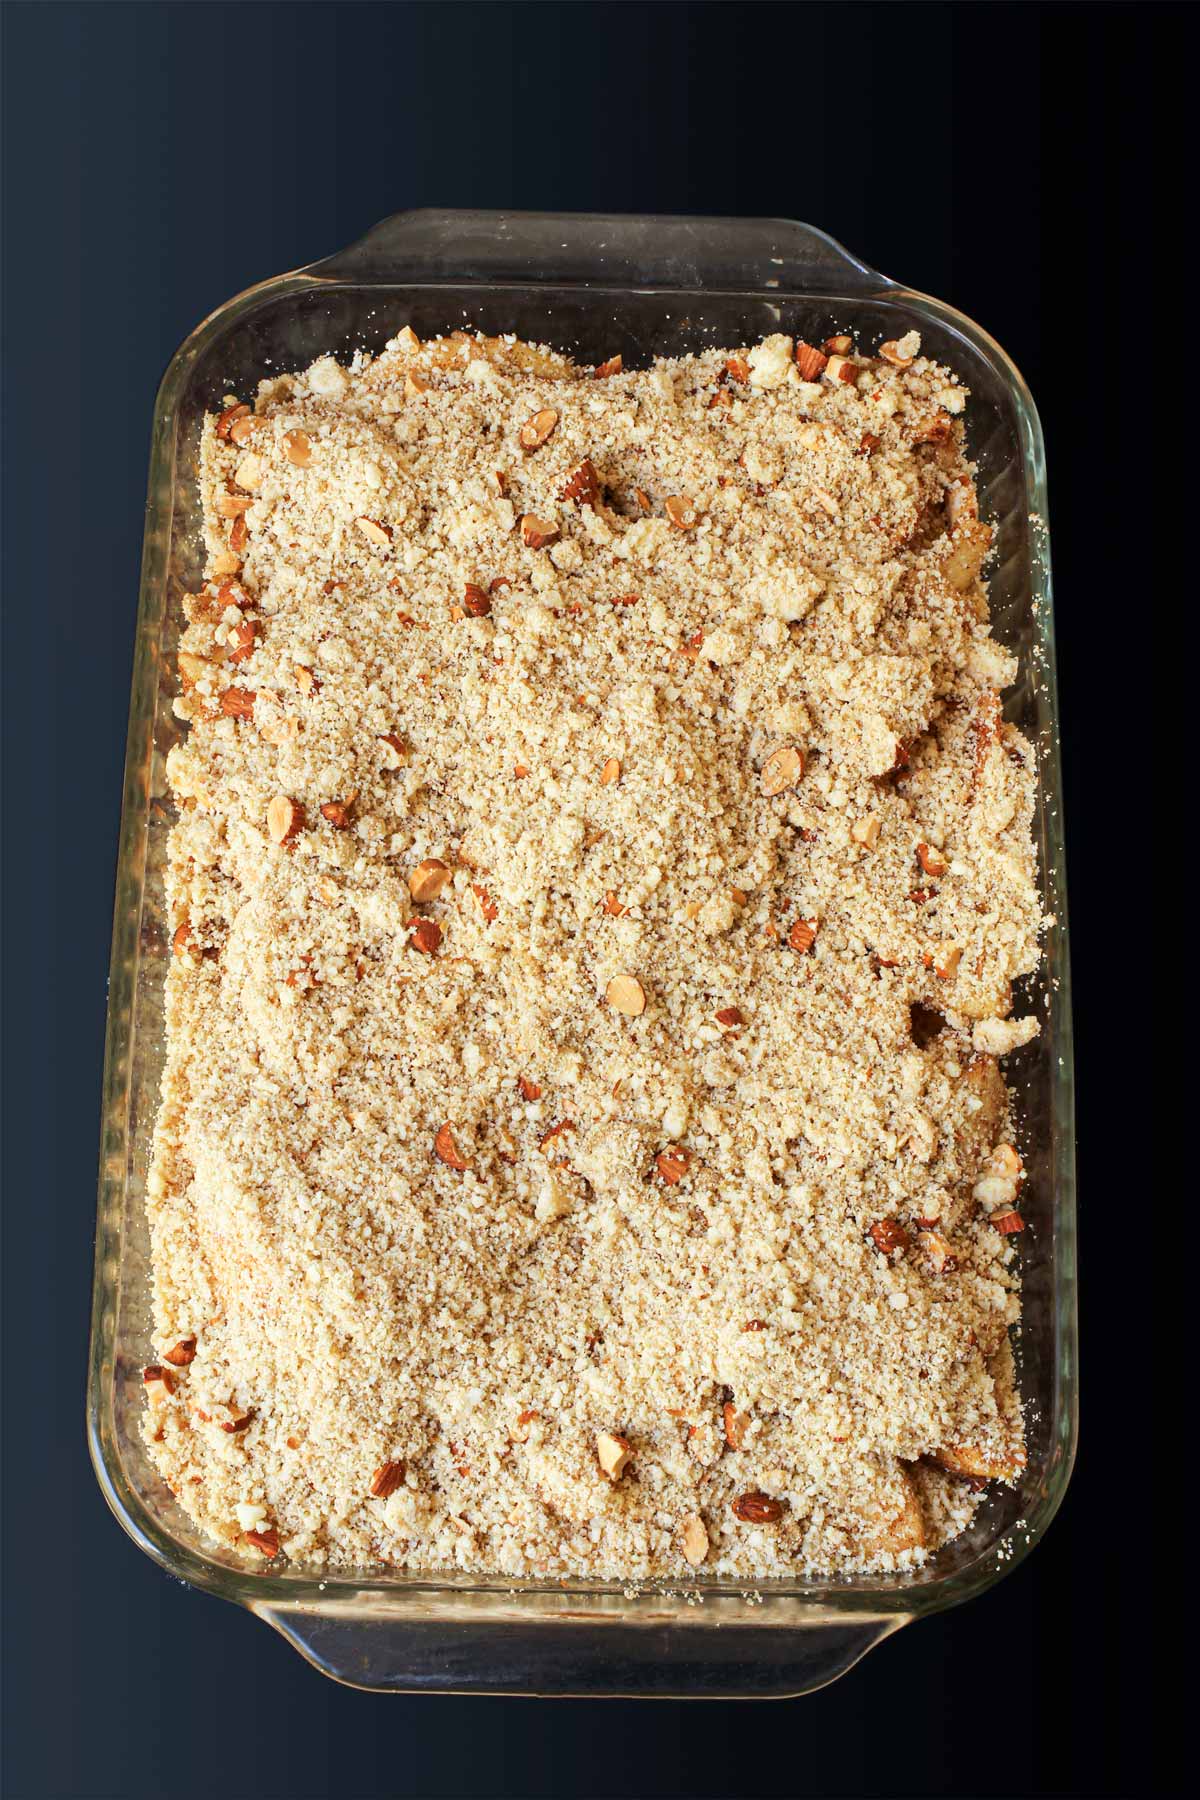 crumb topping over apples in pan ready to bake.